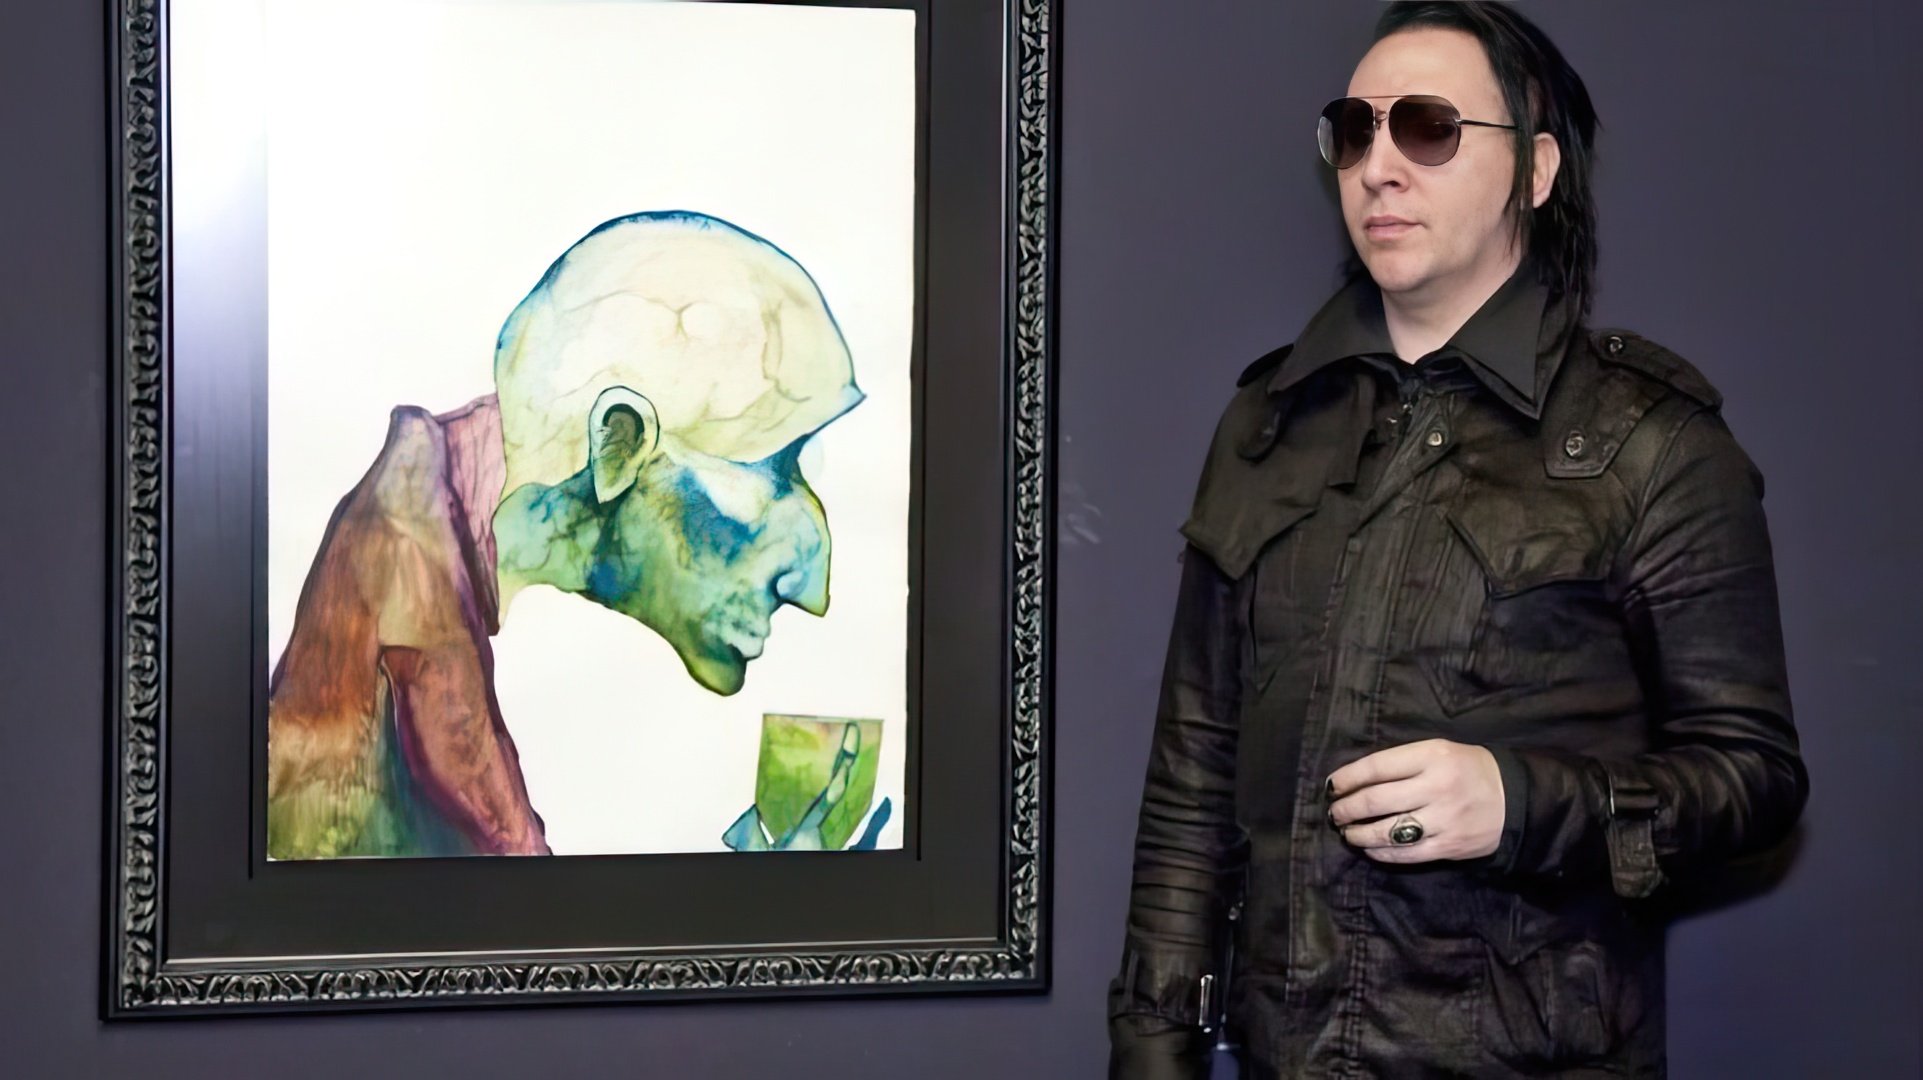 Manson has his own art gallery